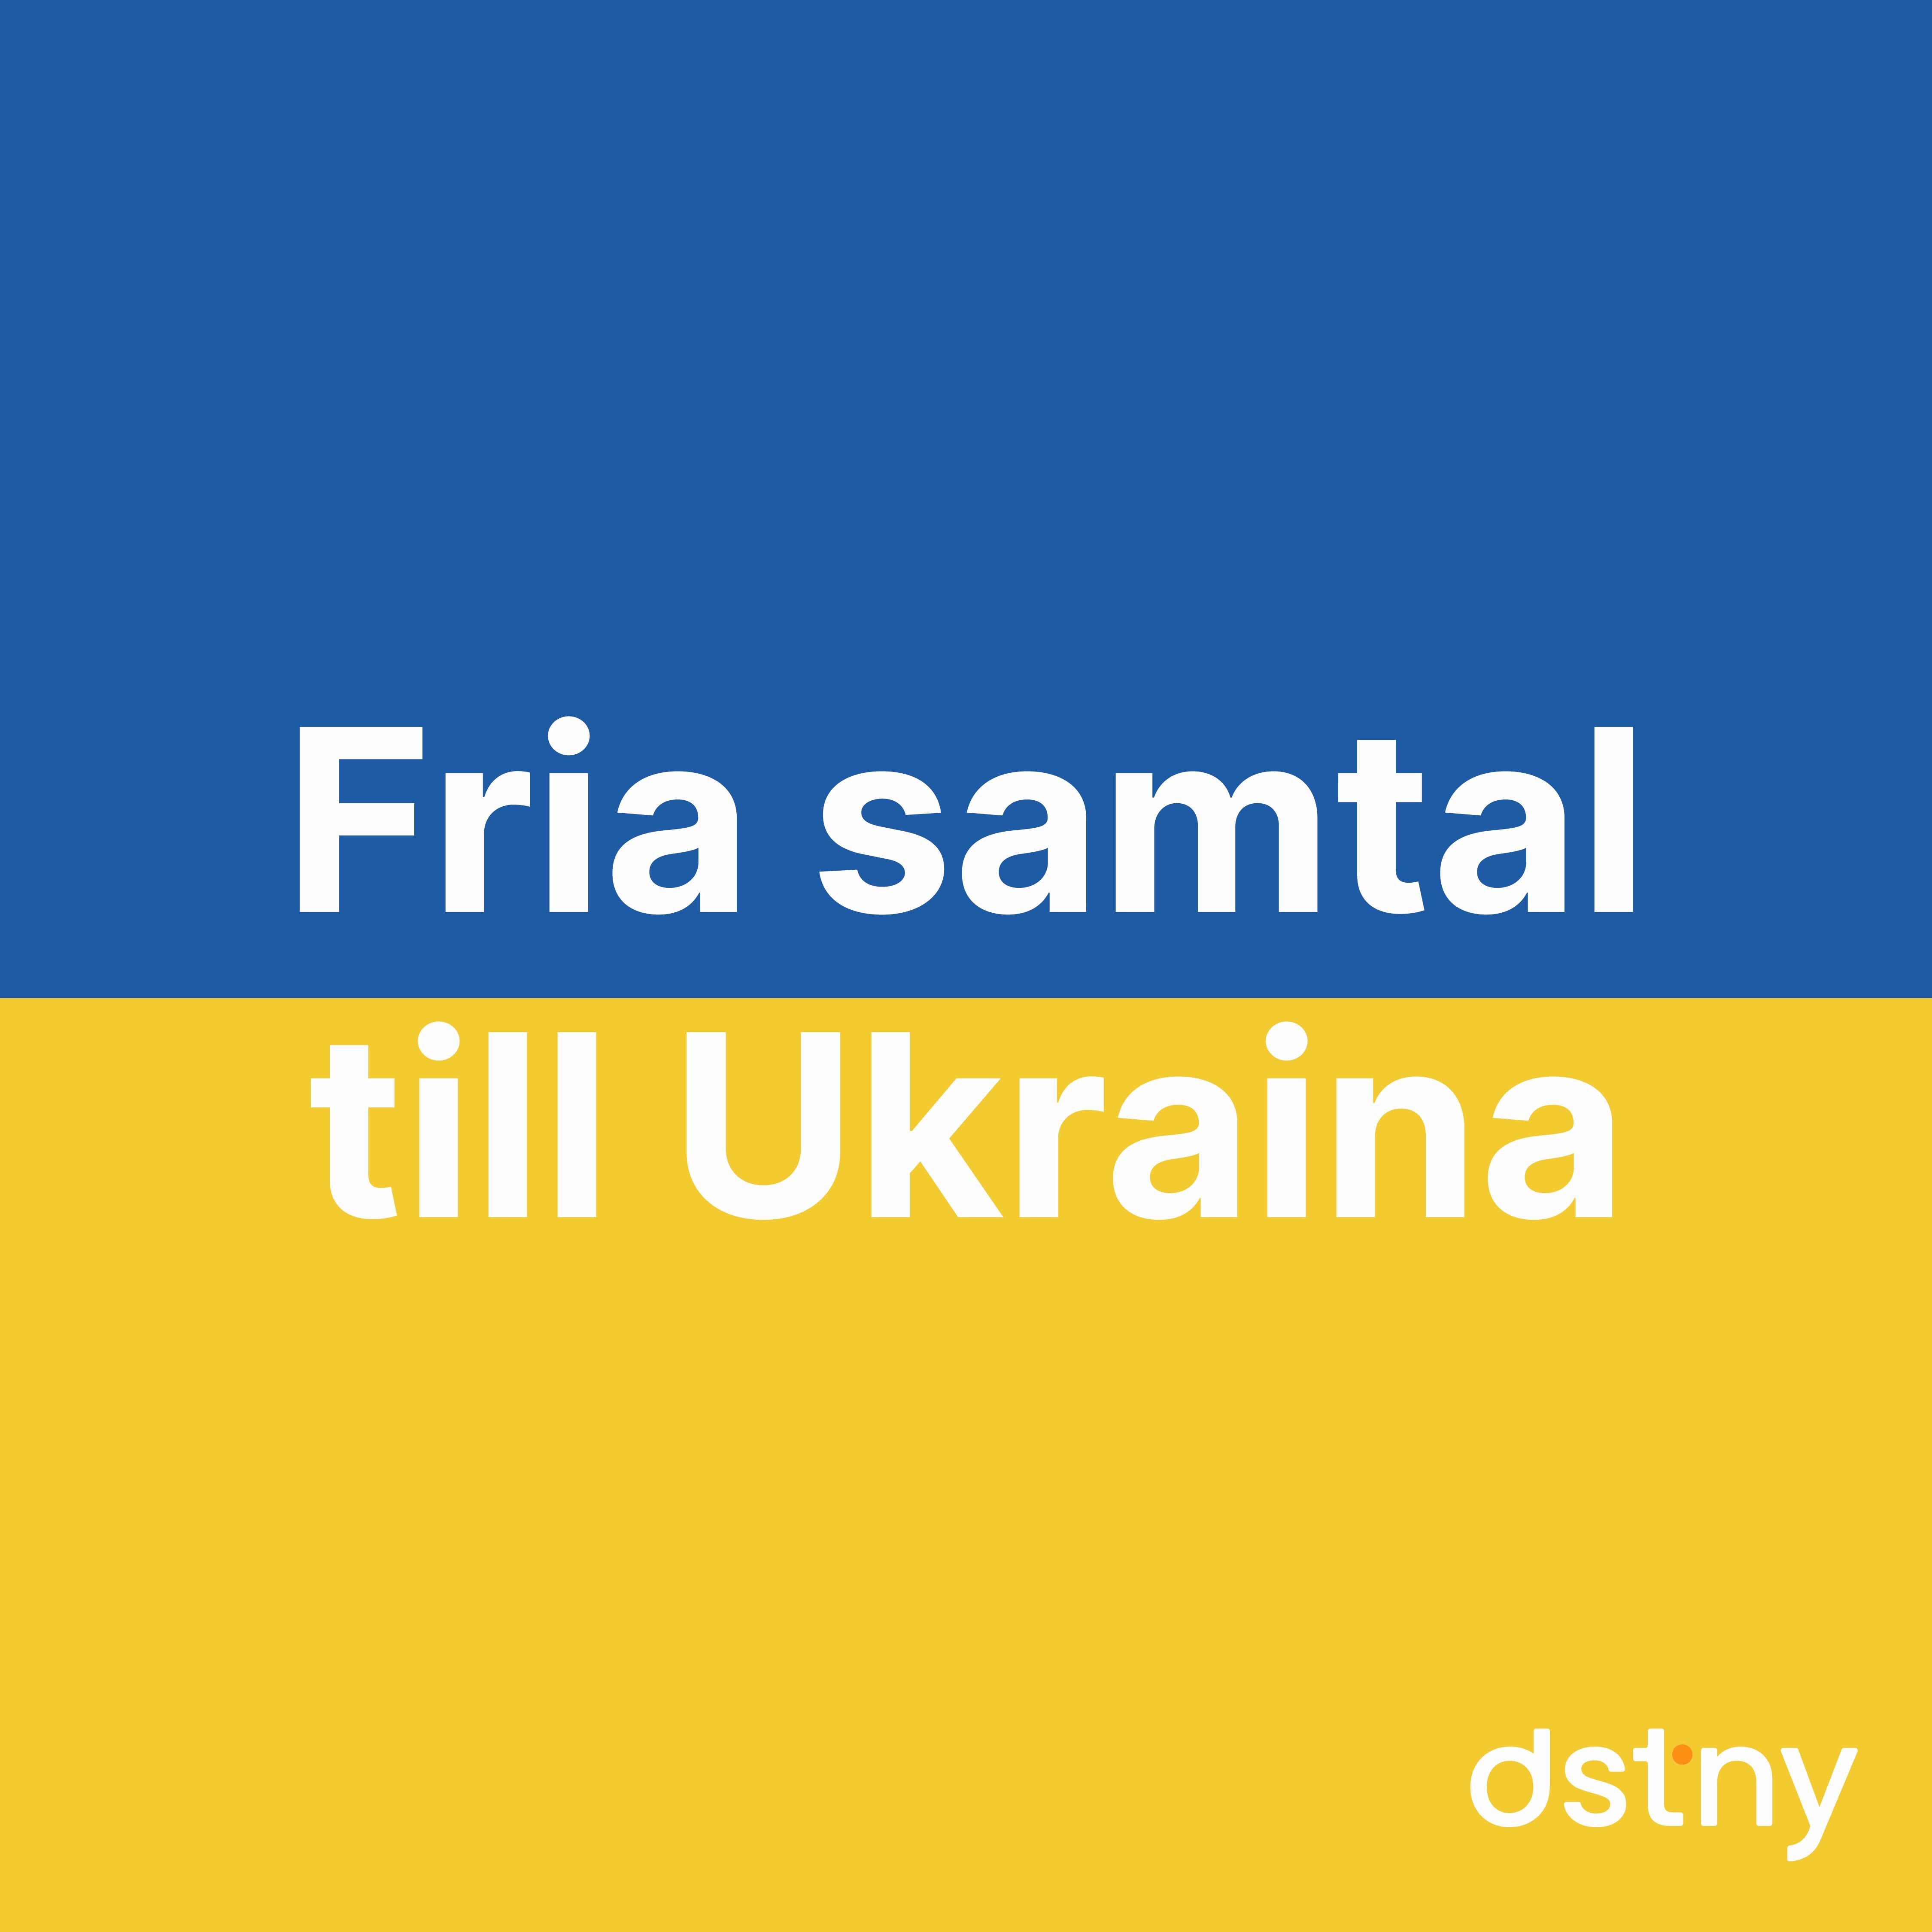 Image in Ukrainian colors with the text "Fee calls to Ukraine" spelled in Swedish